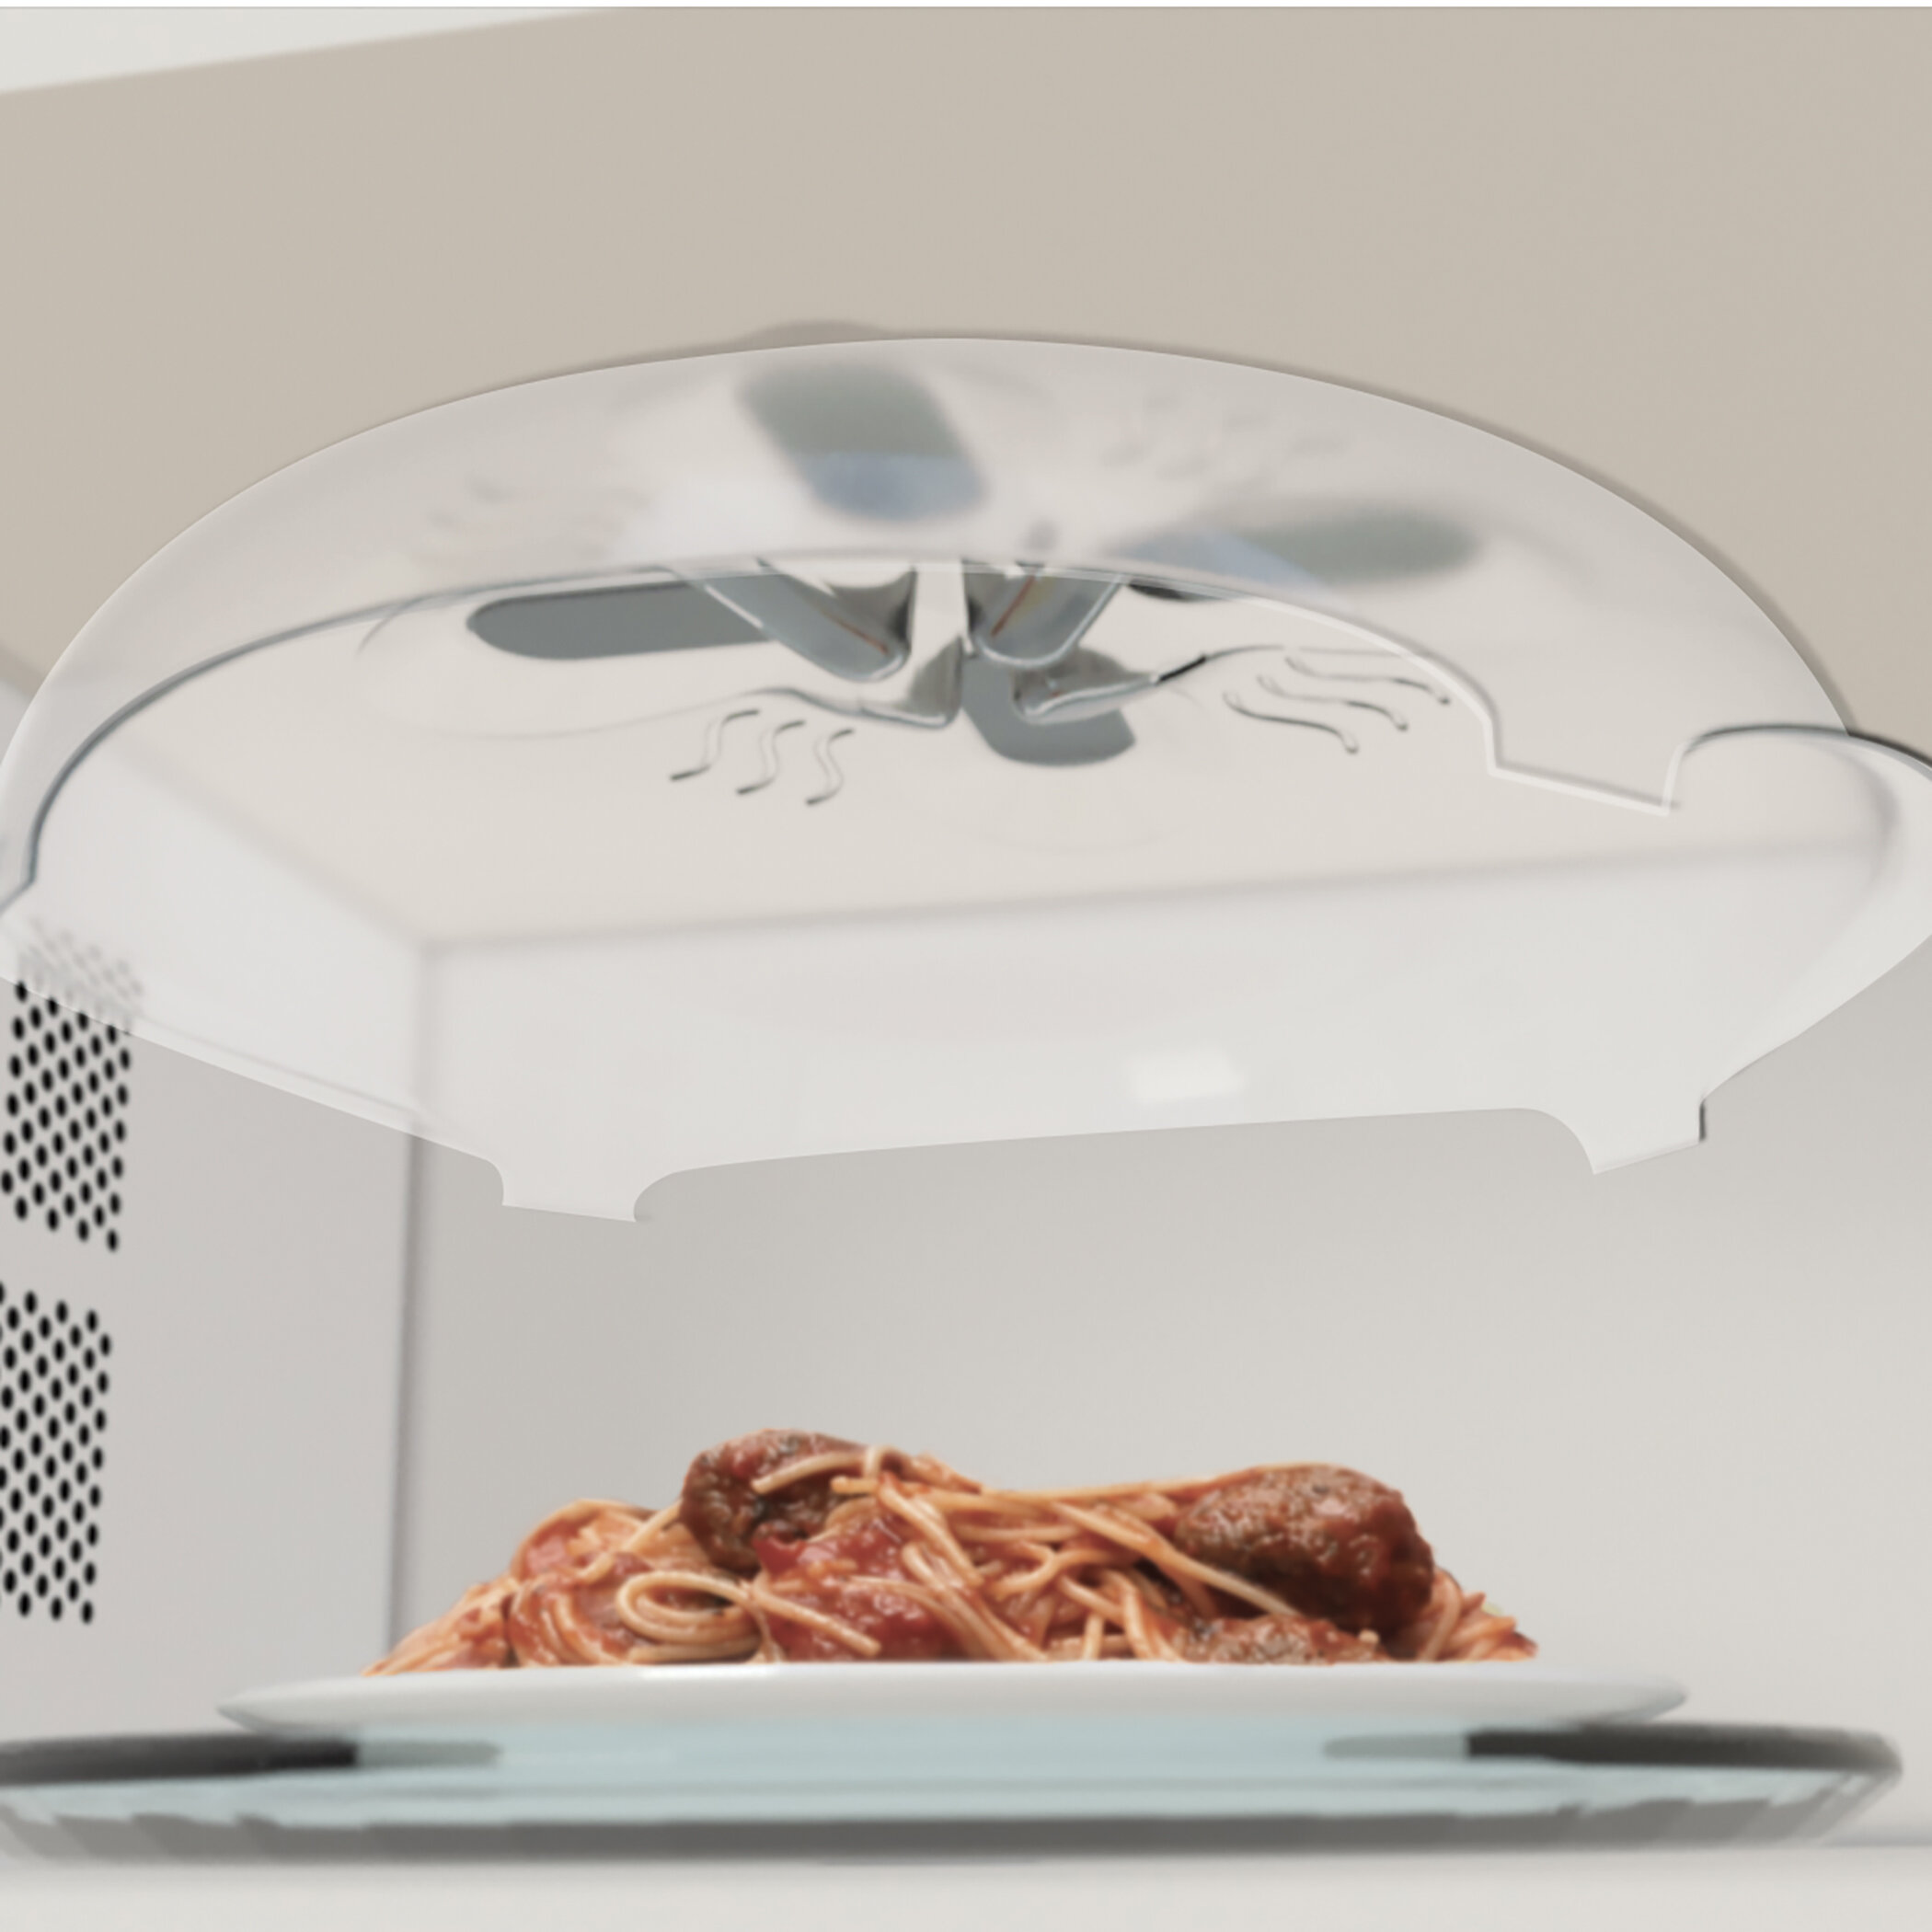 hover cover for microwave amazon